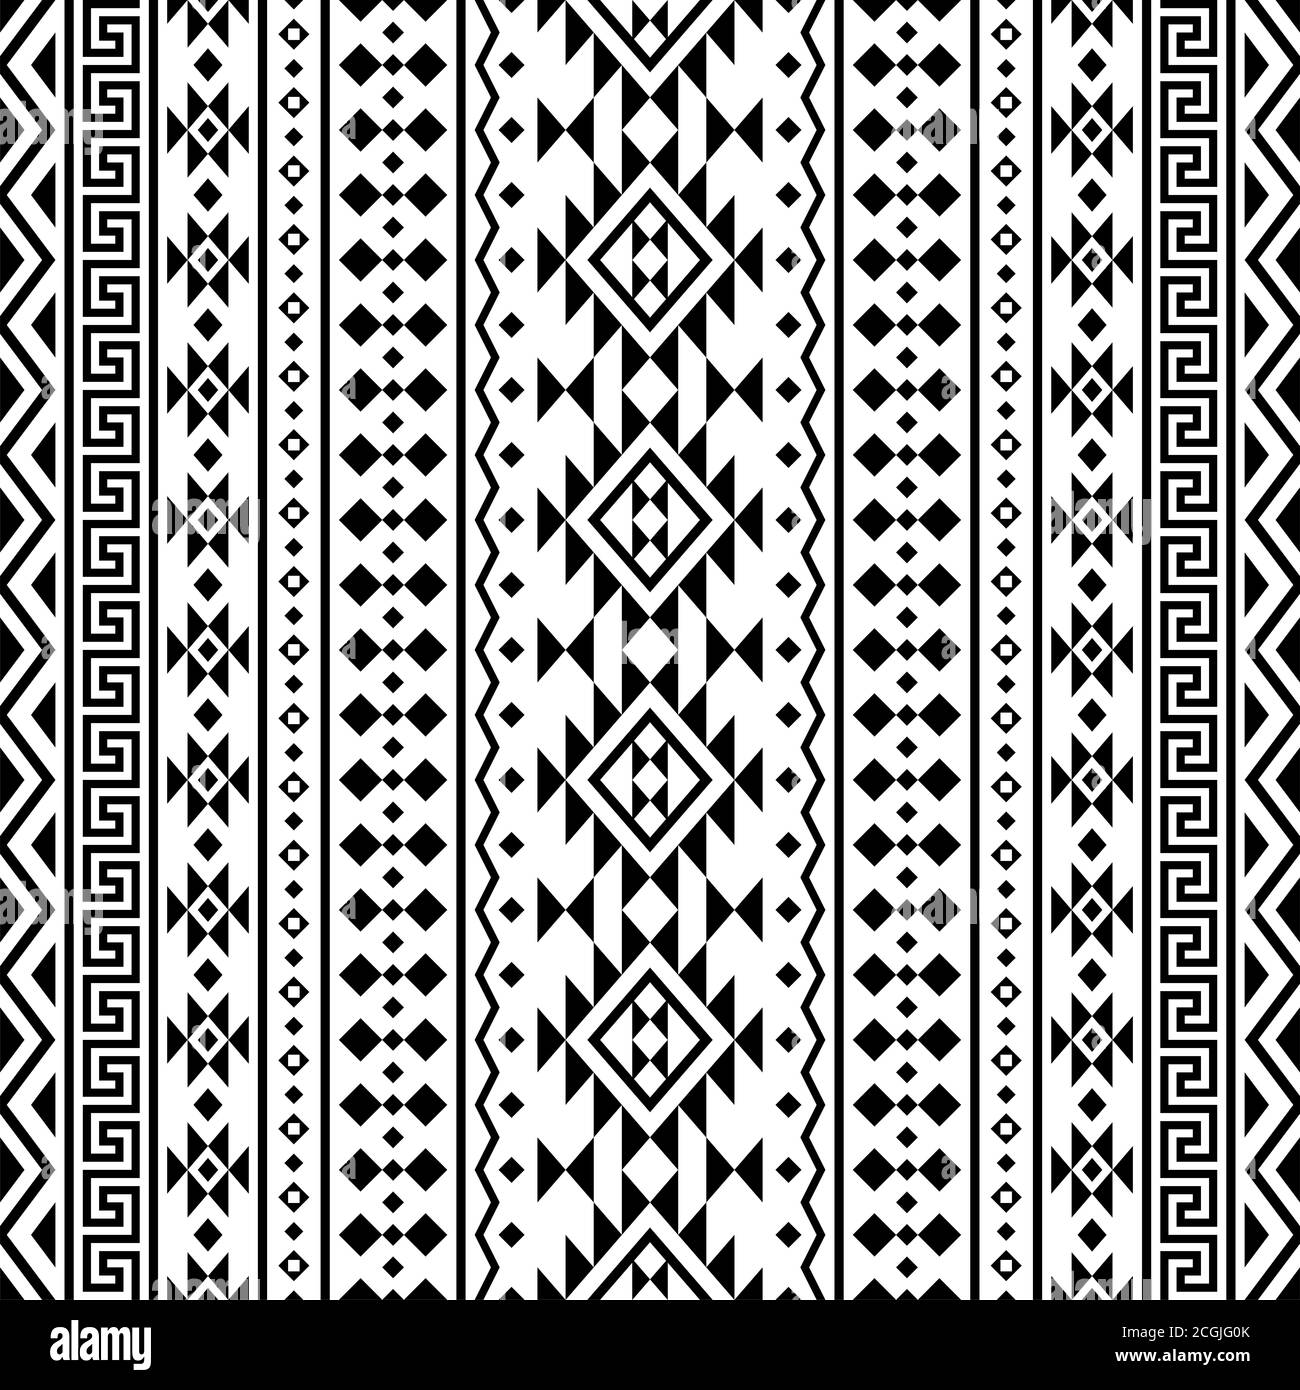 Aztec ethnic pattern texture design background in black white color ...